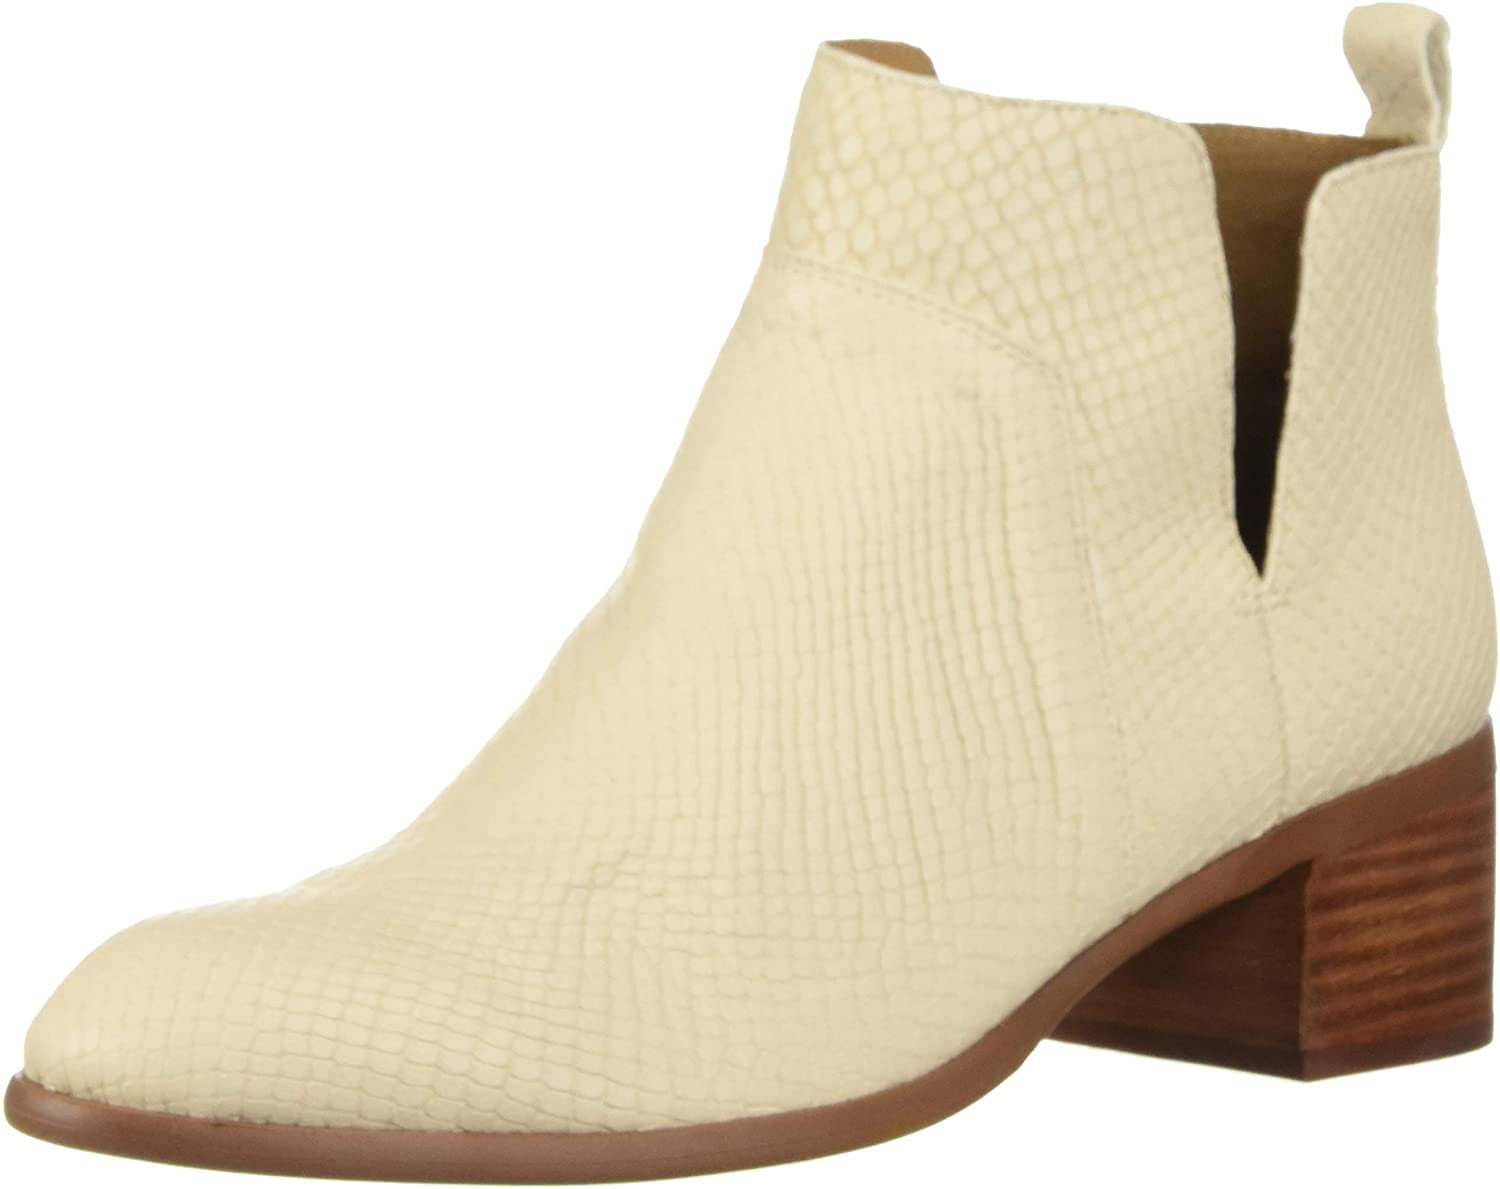 franco sarto women's ankle boots